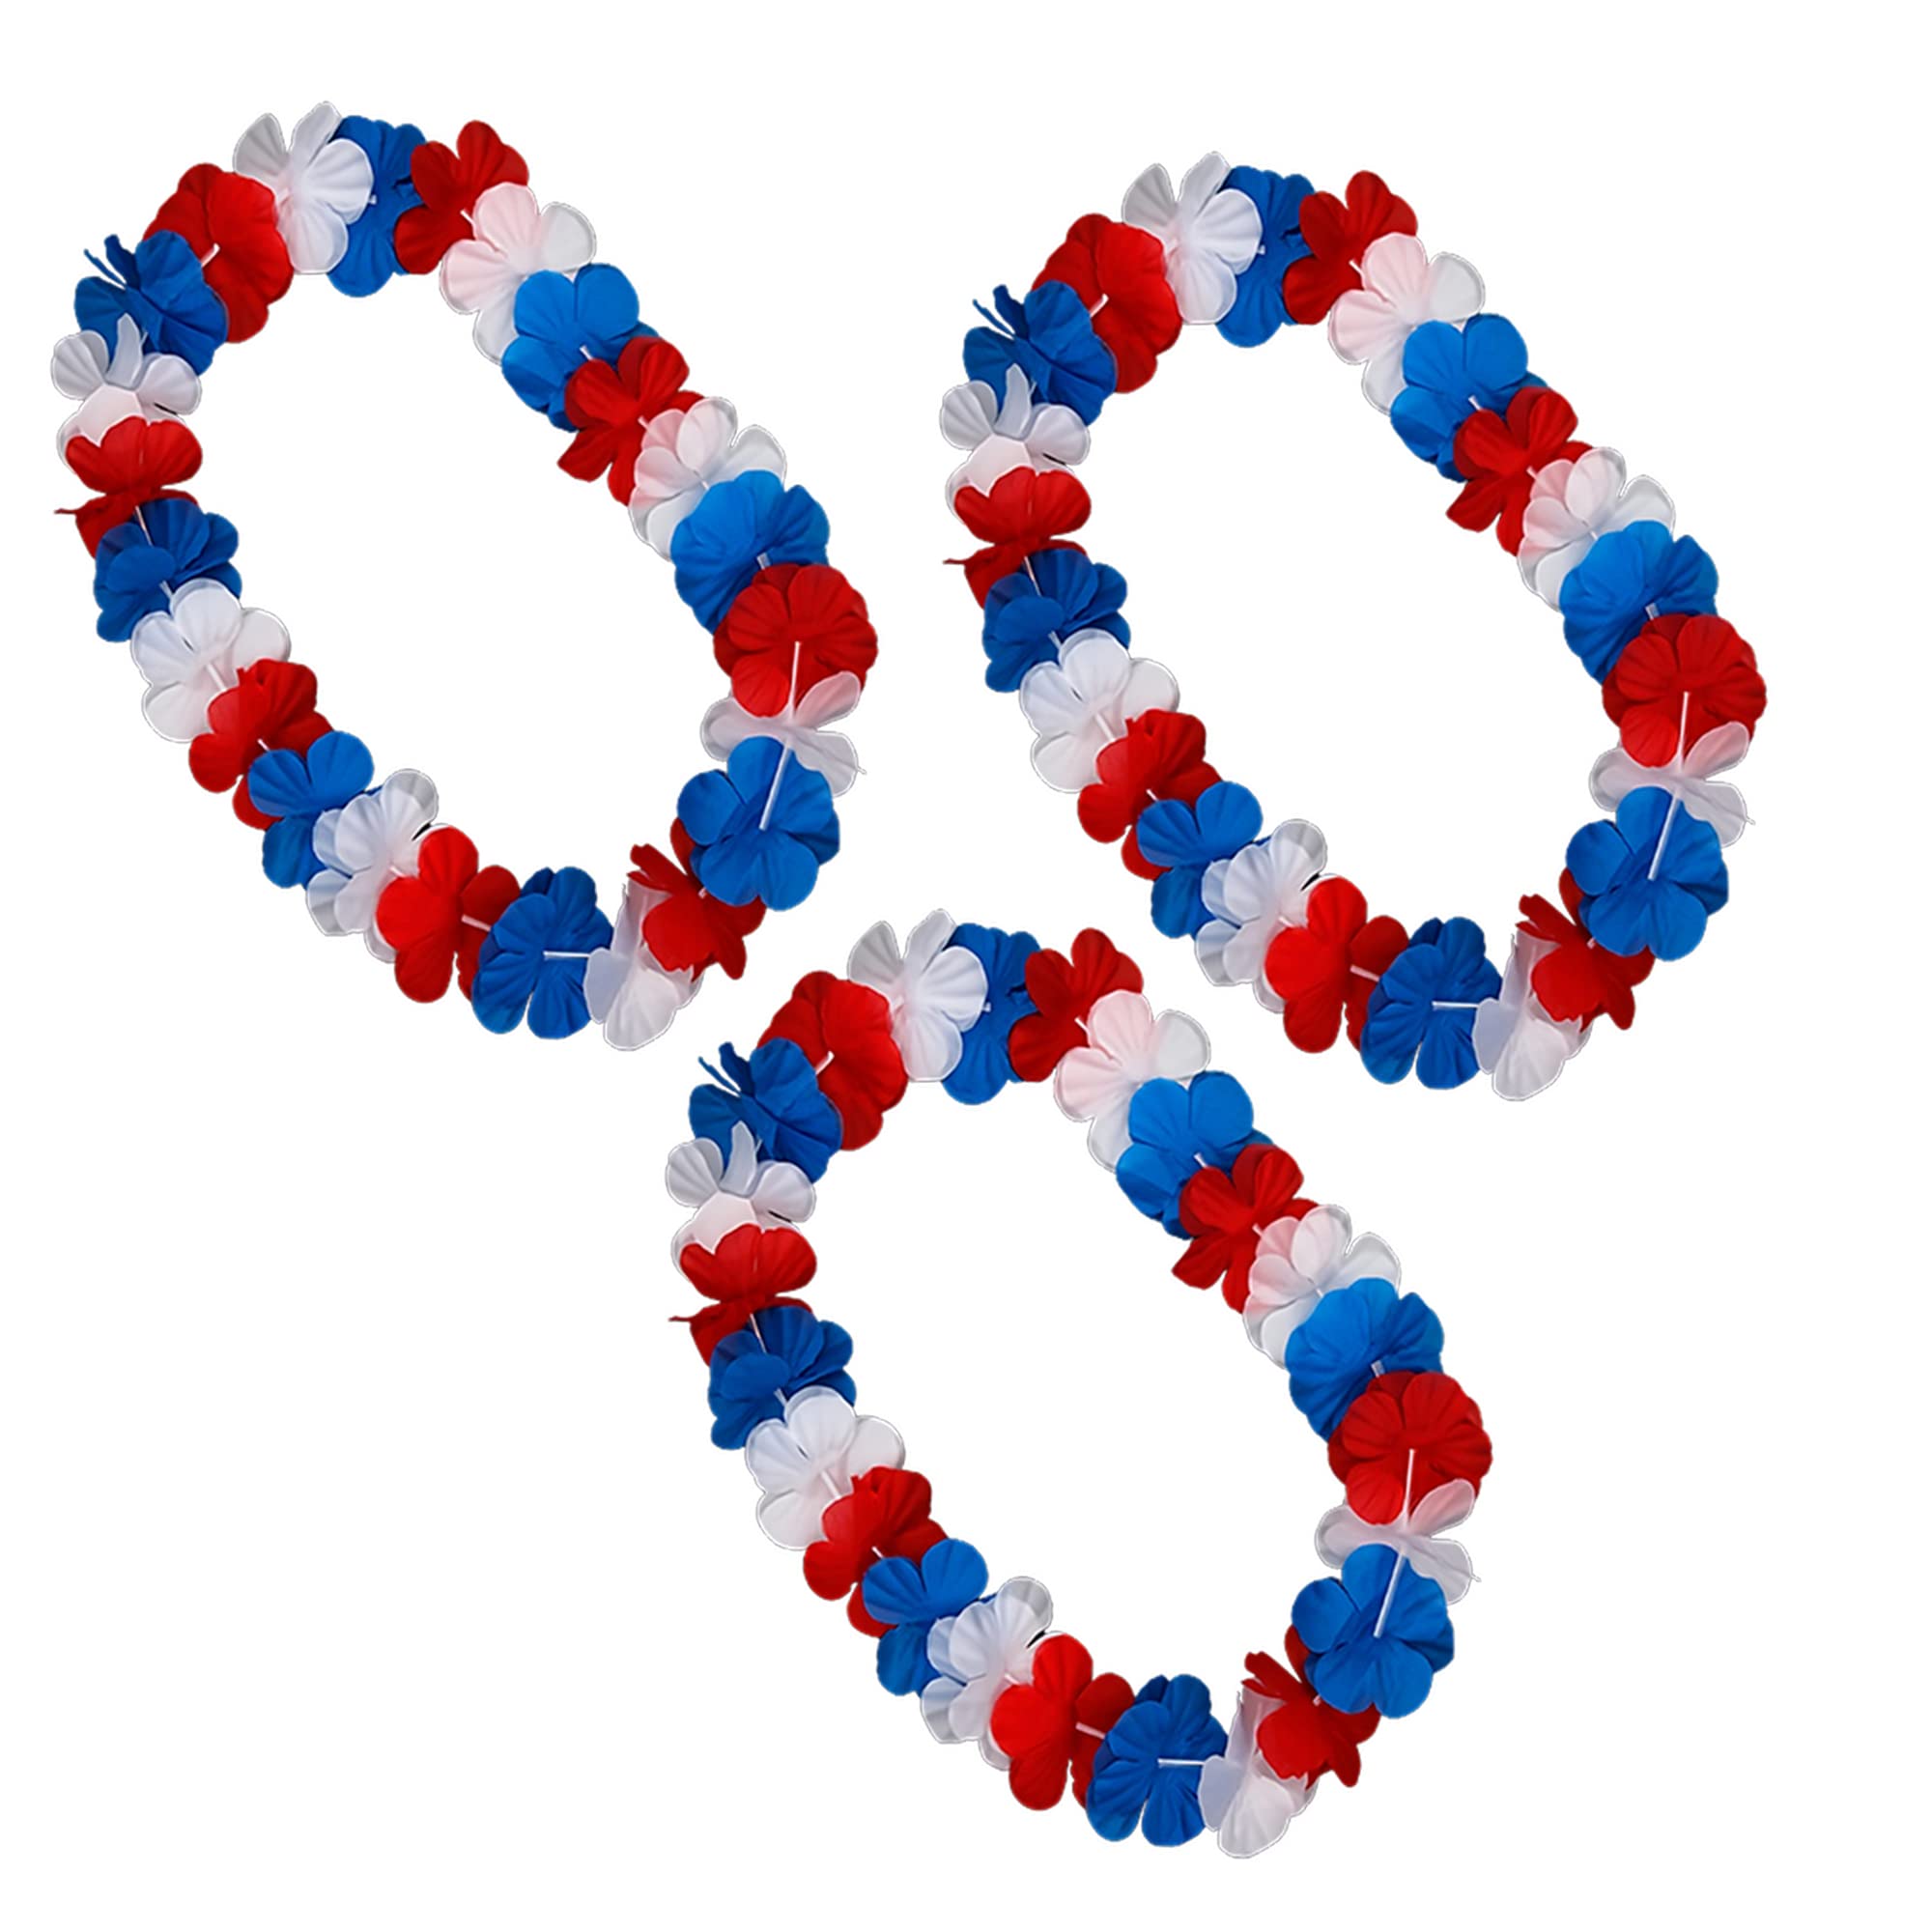 blinkee 3 Pack - Patriotic Pua Model - Hawaiian Lei Necklace - Red, White, Blue - Non-Light Up - Libertyville Luau Edition - Perfect for Independence Day, Parades, BBQs, and Festivals